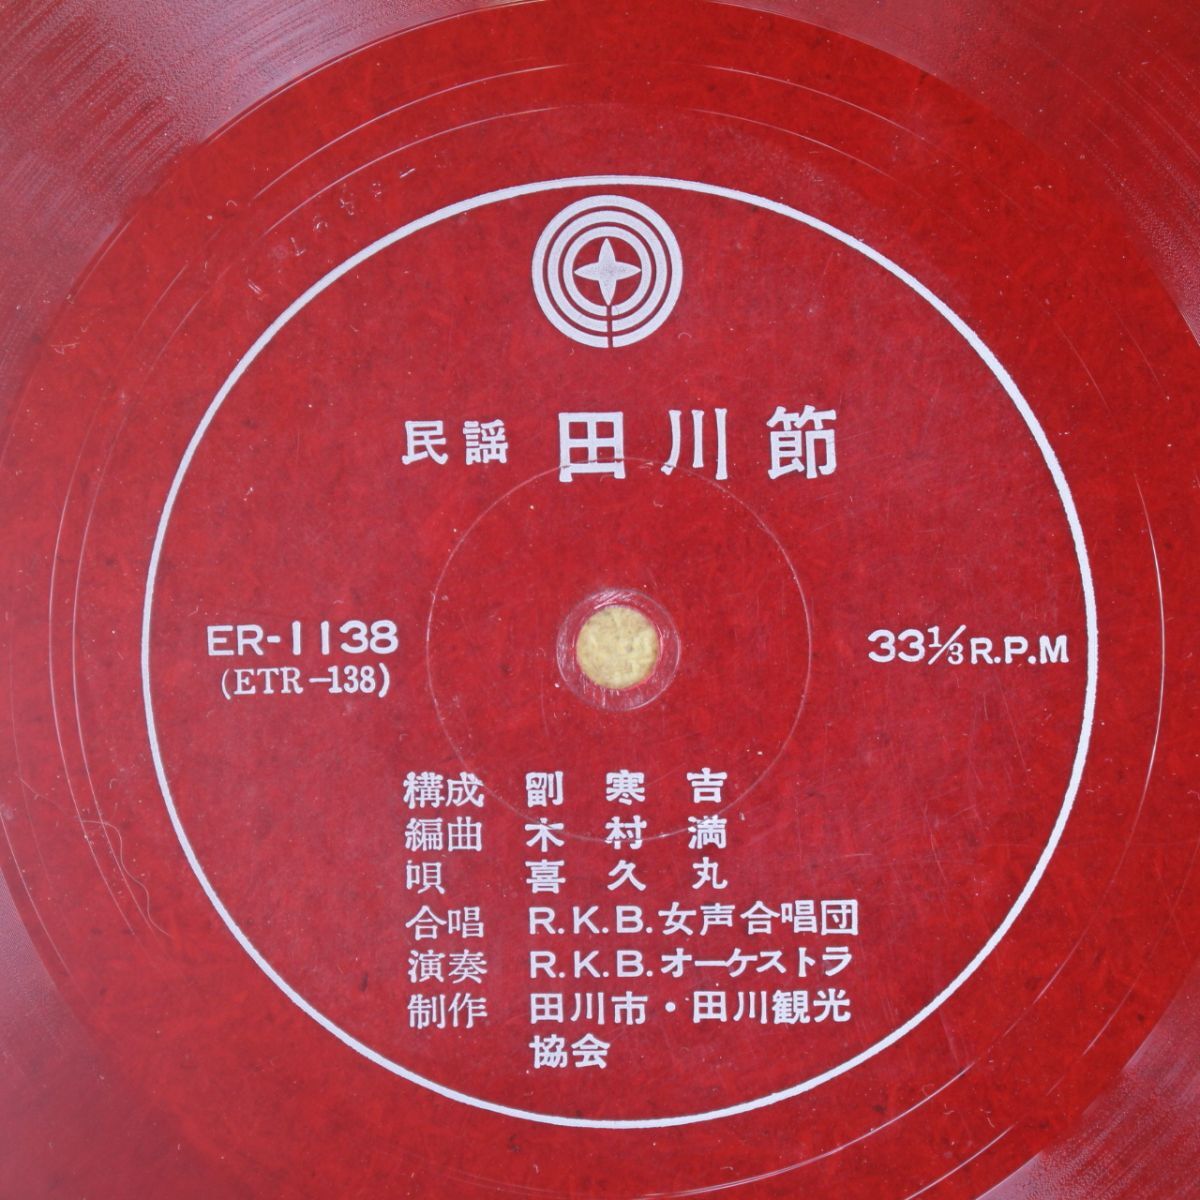 f08/EP/ self . record .. circle [ rice field river .] rice field river sightseeing association /RKB